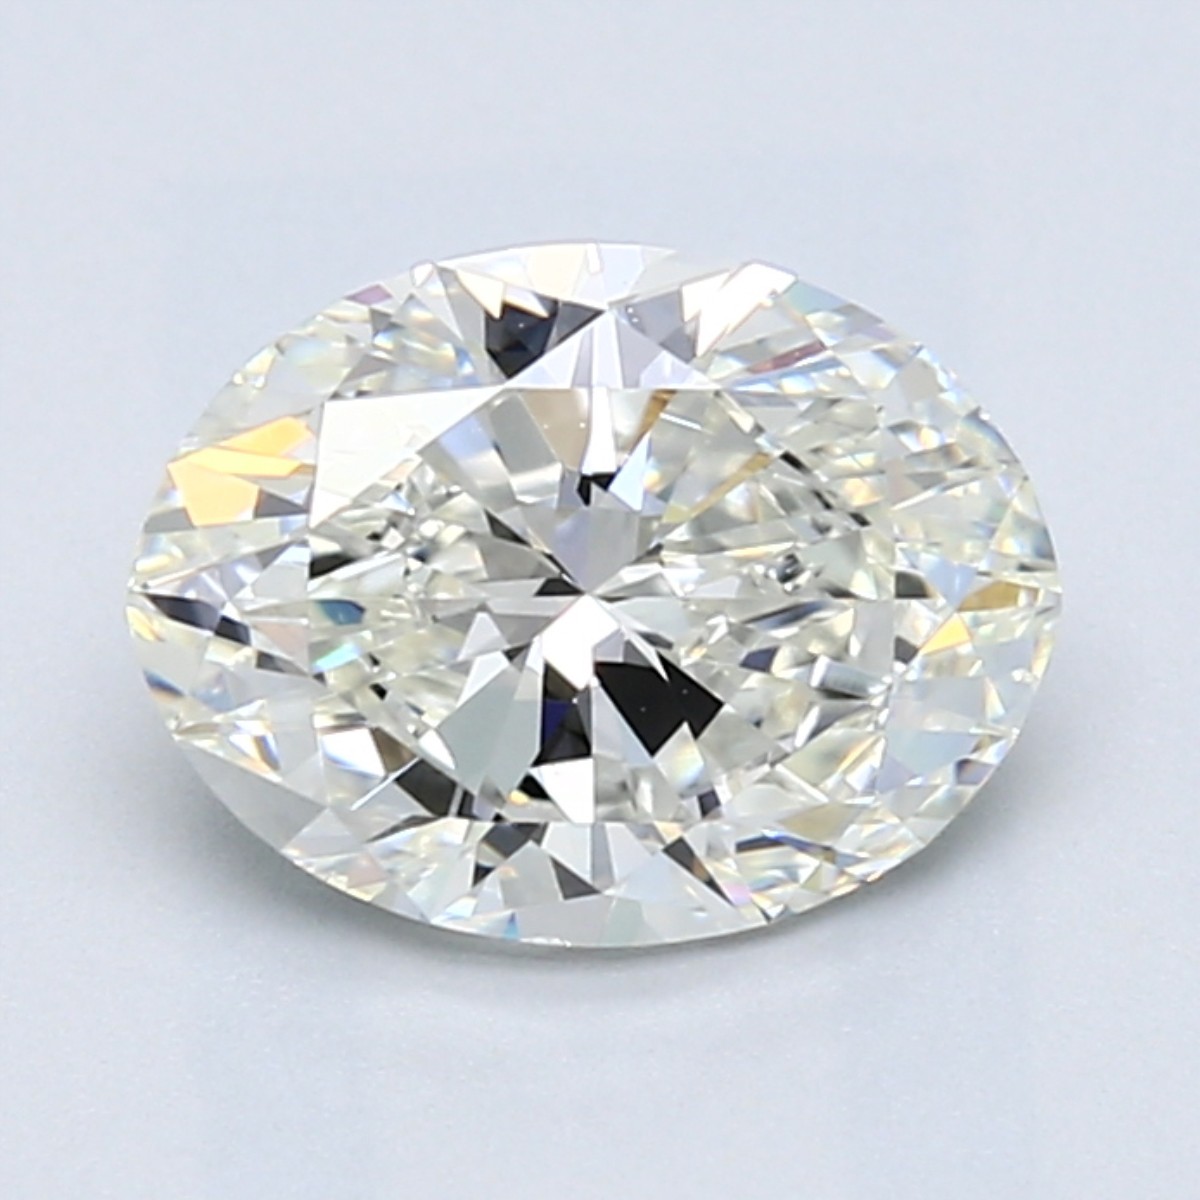 Oval 1.9 Carat G Color VS2 Clarity For Sale